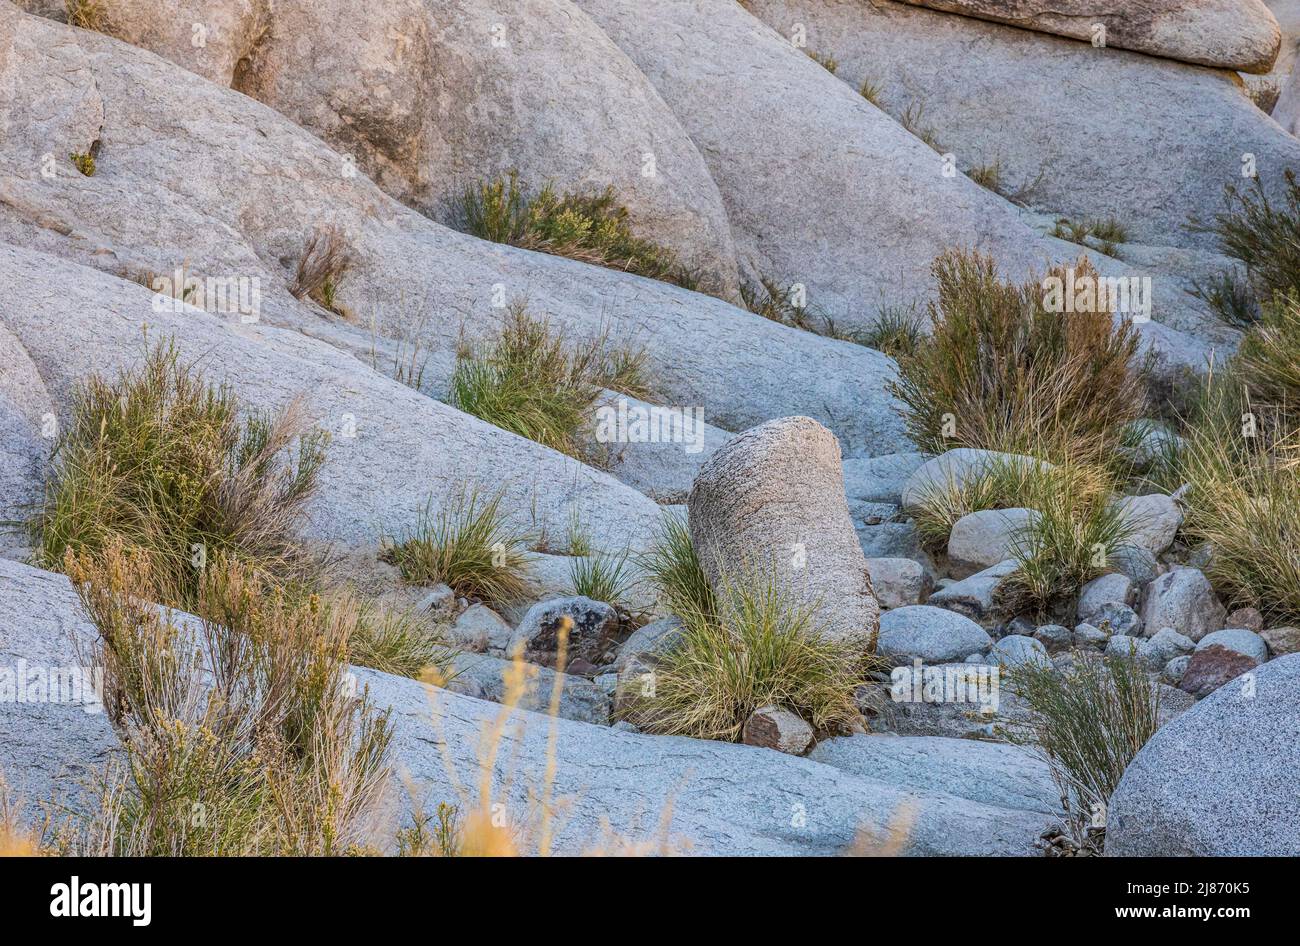 Rocks shrubs and grasses in the open shade of Rattlesnake Canyon, Joshua Tree National Park. Stock Photo